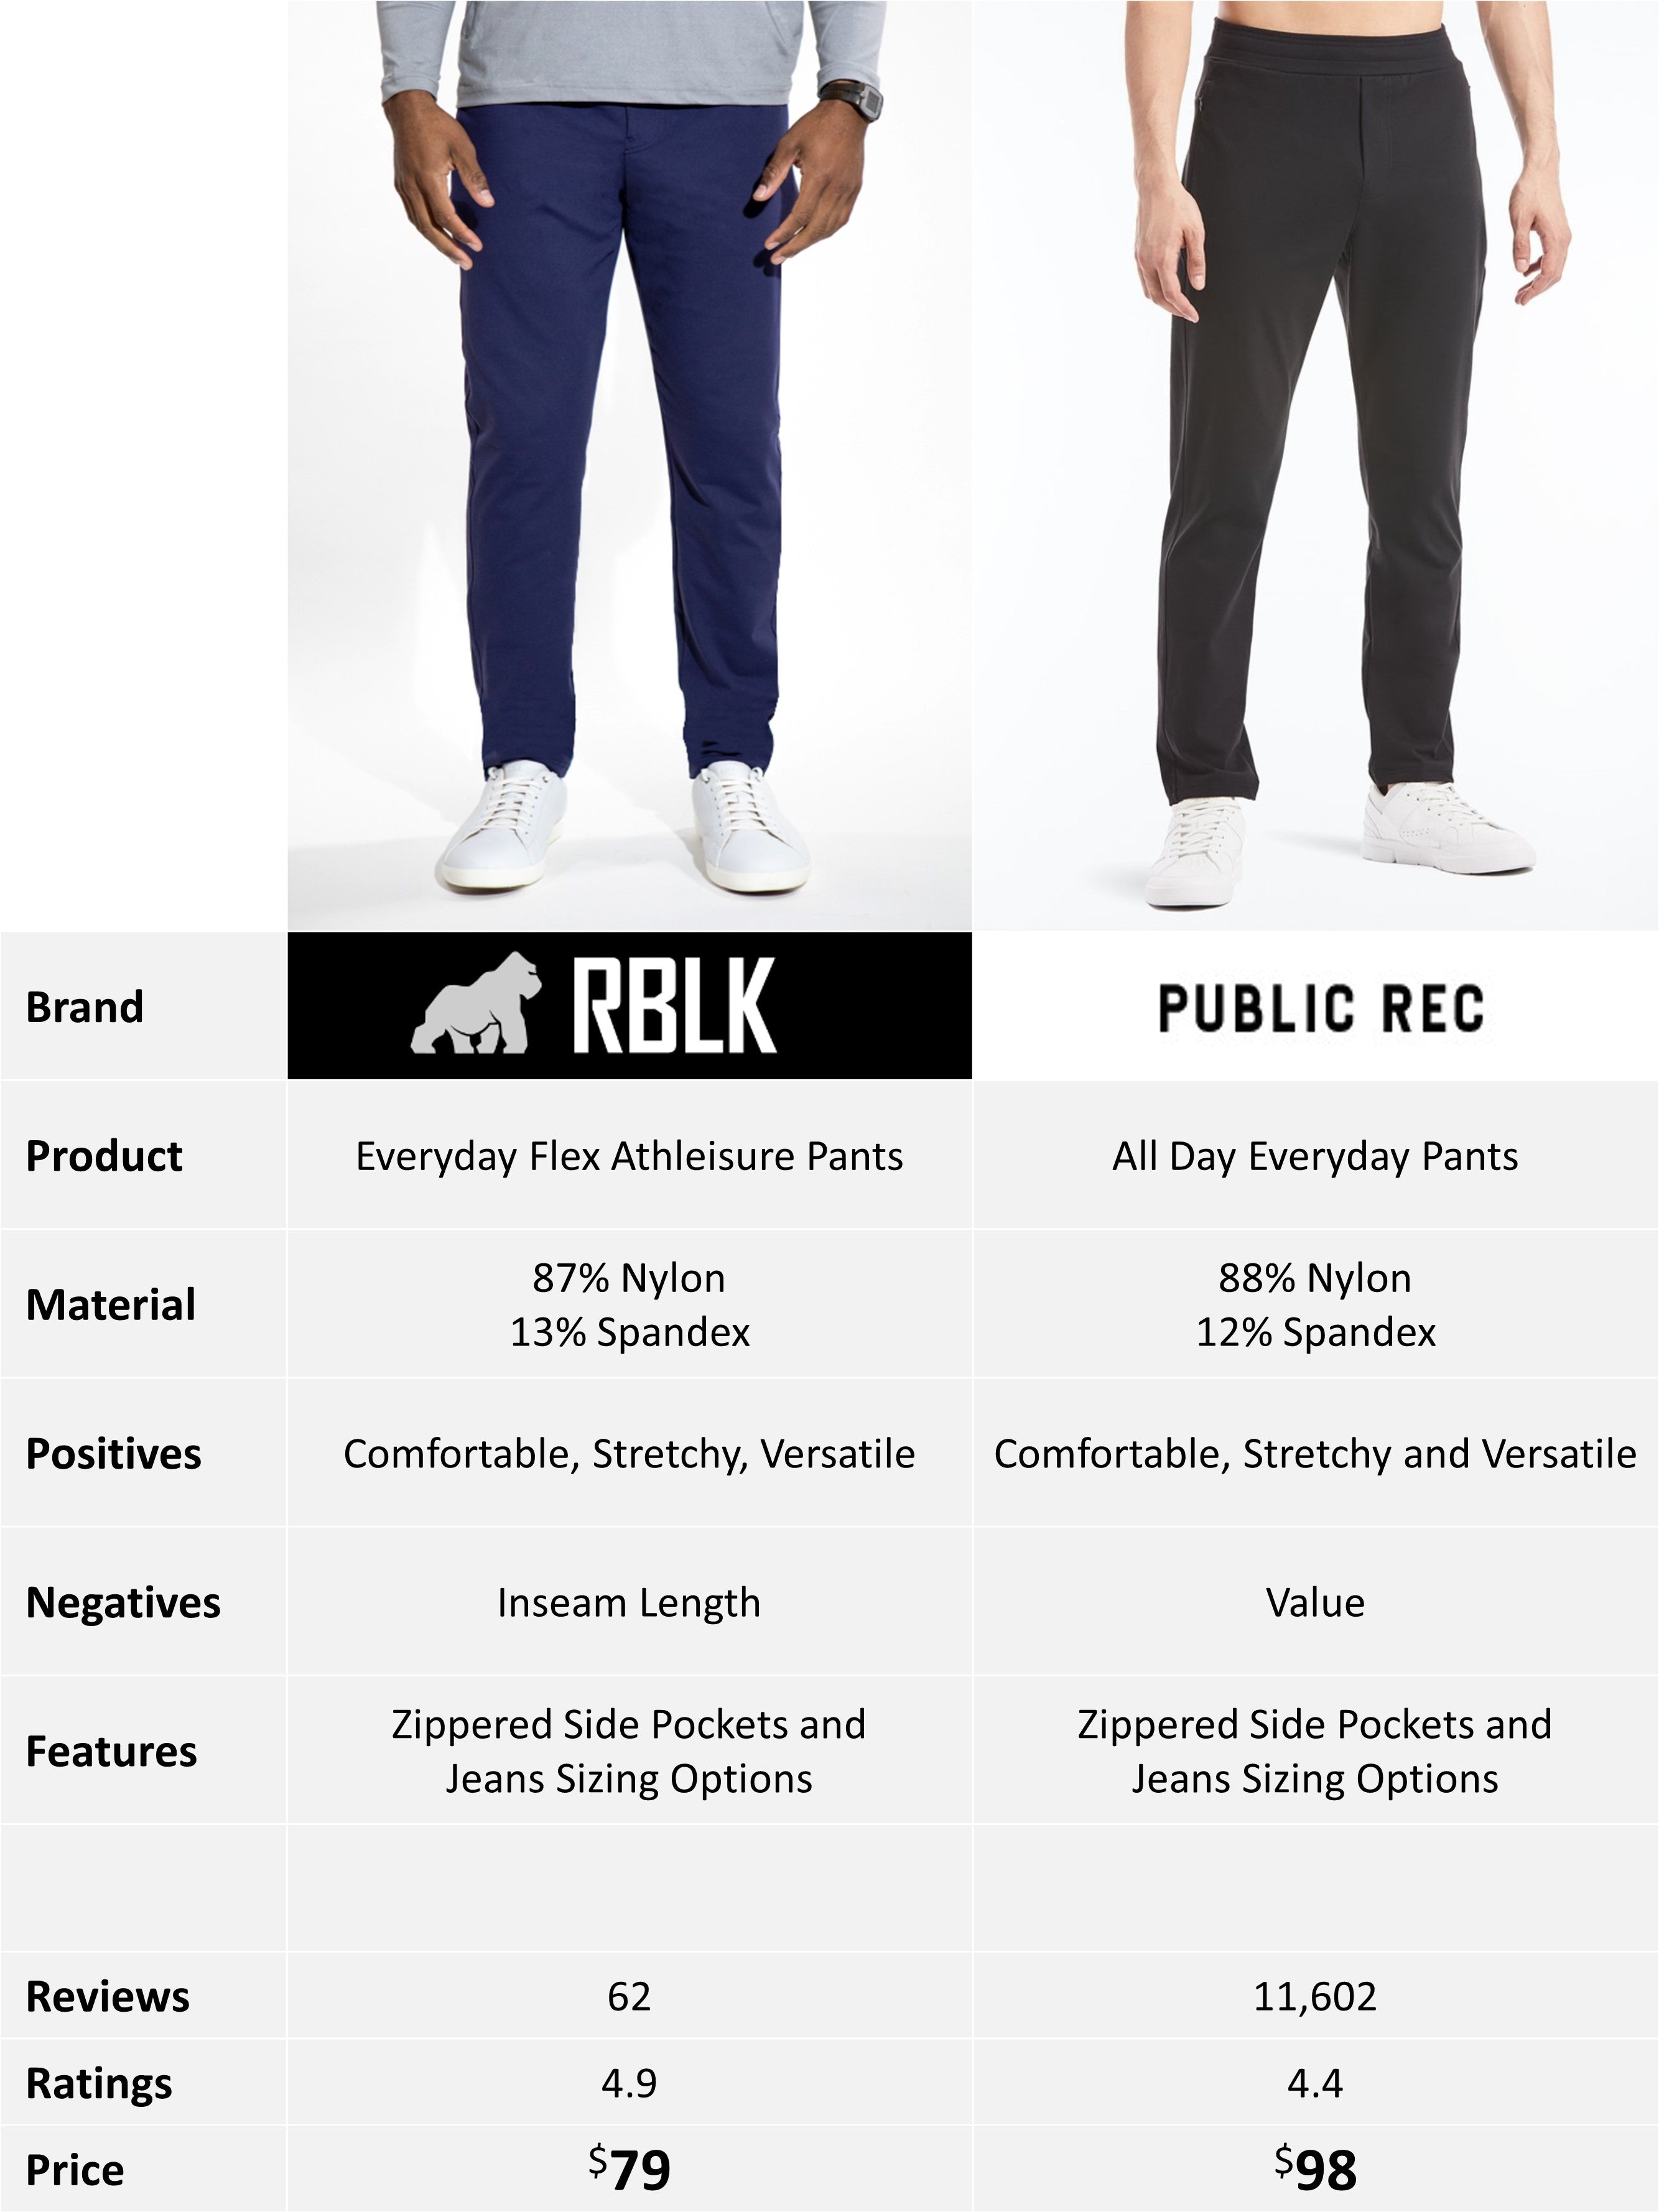 In-Depth Public Rec Pants Review – Are They Worth the Money?